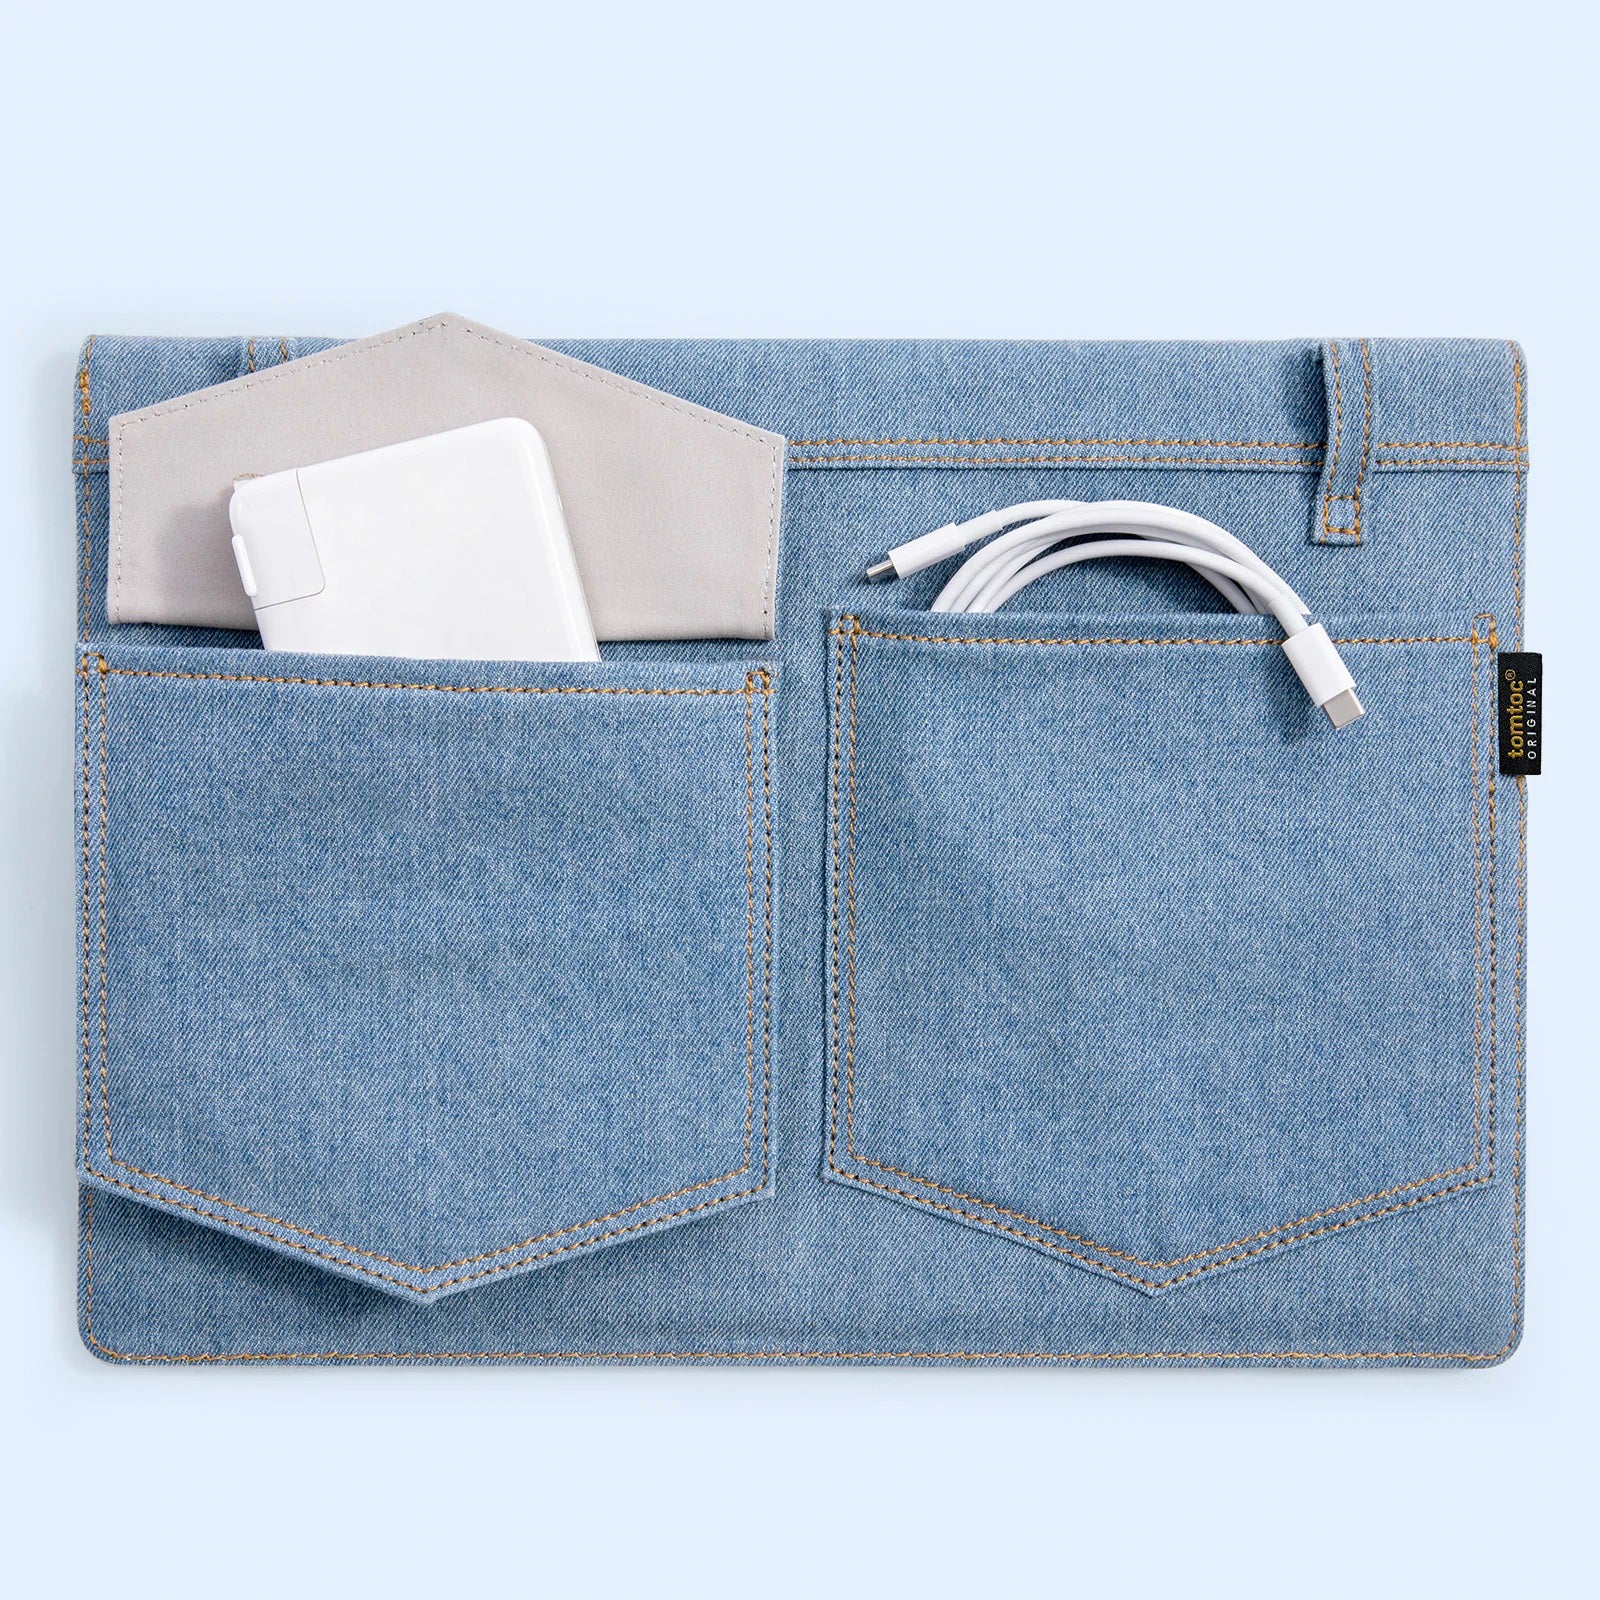 tomtoc 13 Inch Casual Jeans Laptop Sleeve with Shoulder Strap - Blue